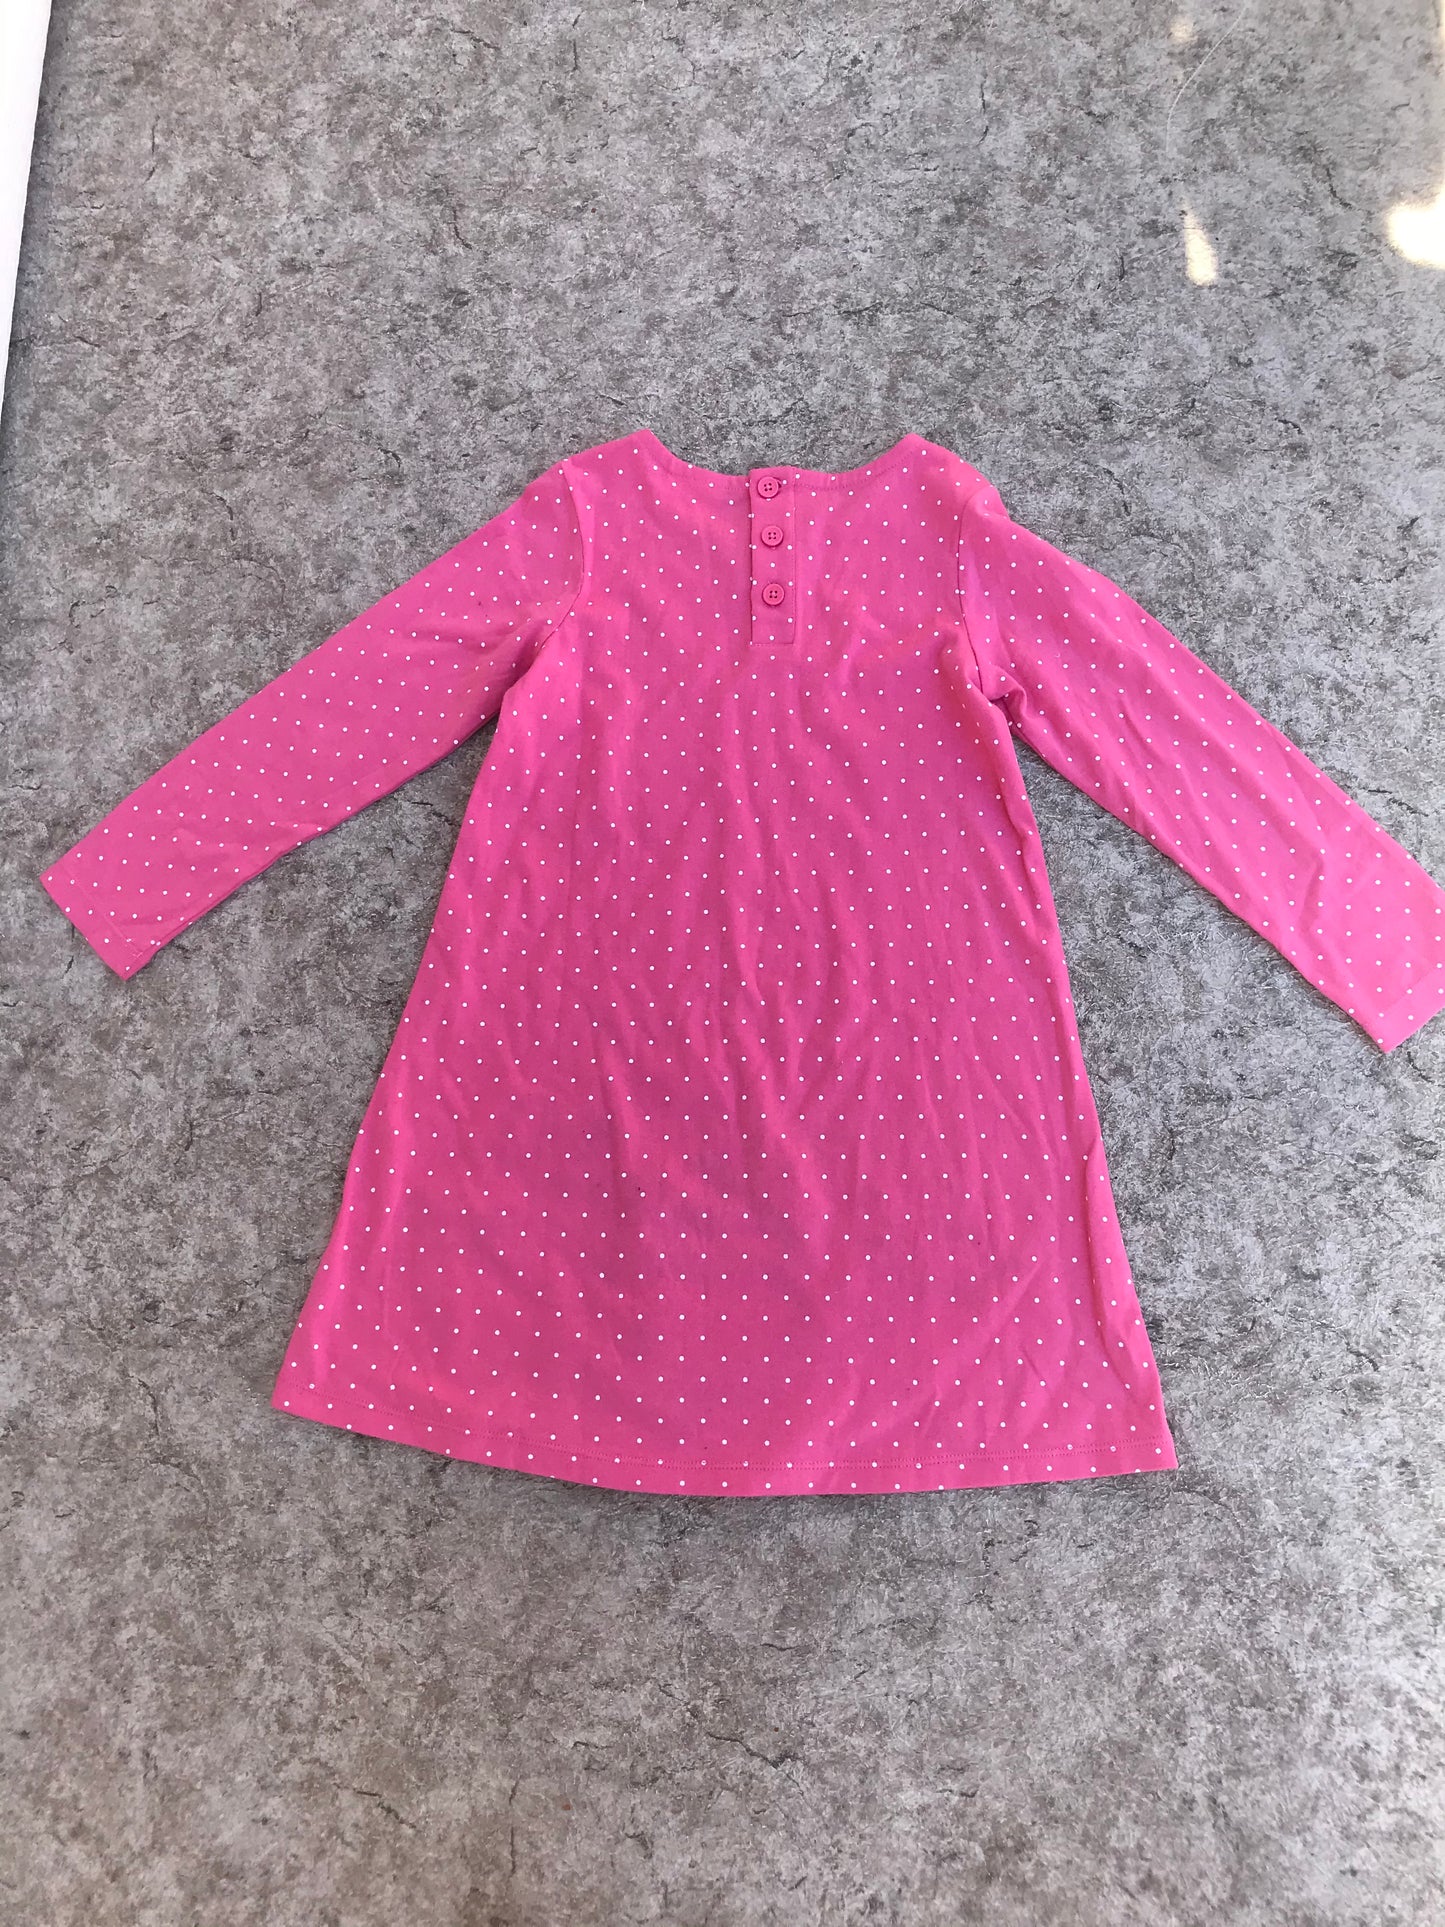 Dress Child Size 8 Hanna Anderson Cotton Jersey Christmas Dress  Outstanding Quality New Demo Model